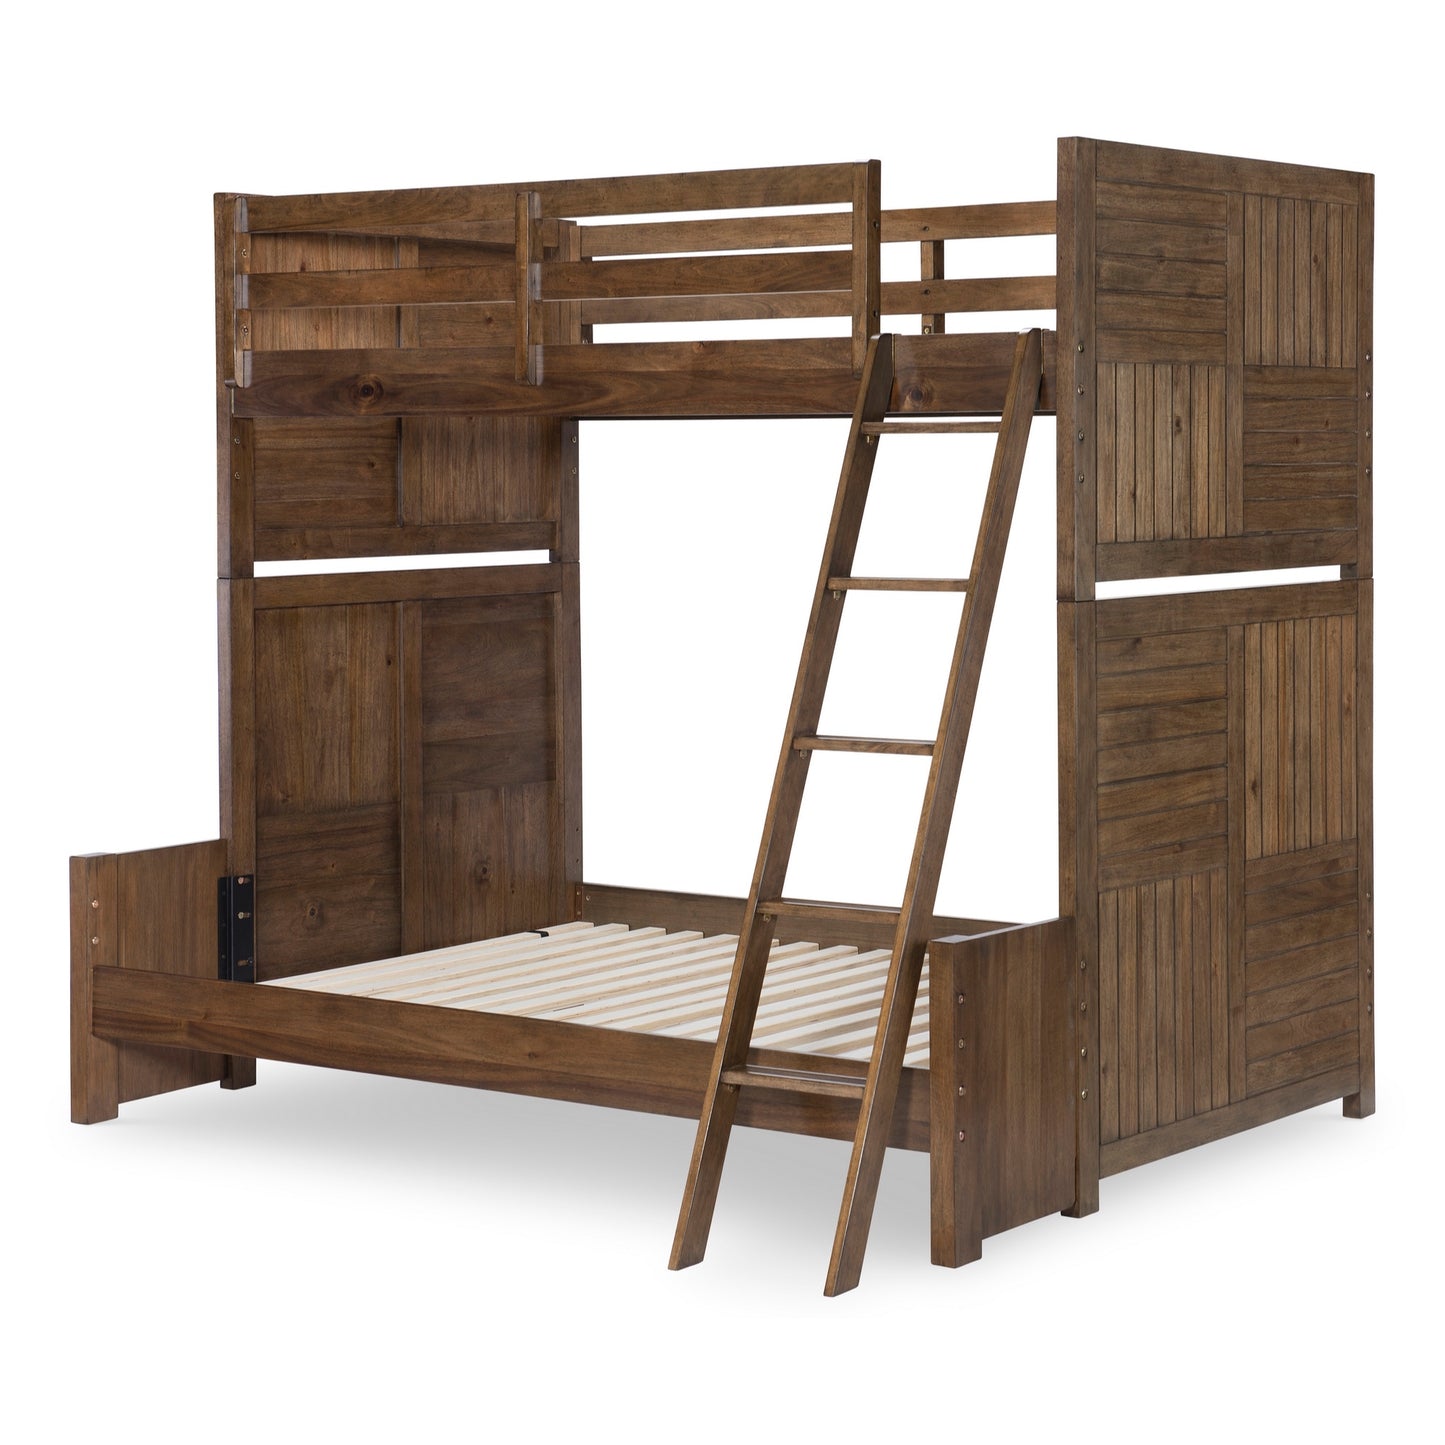 Summer Camp Twin Over Full Bunk Bed - Brown